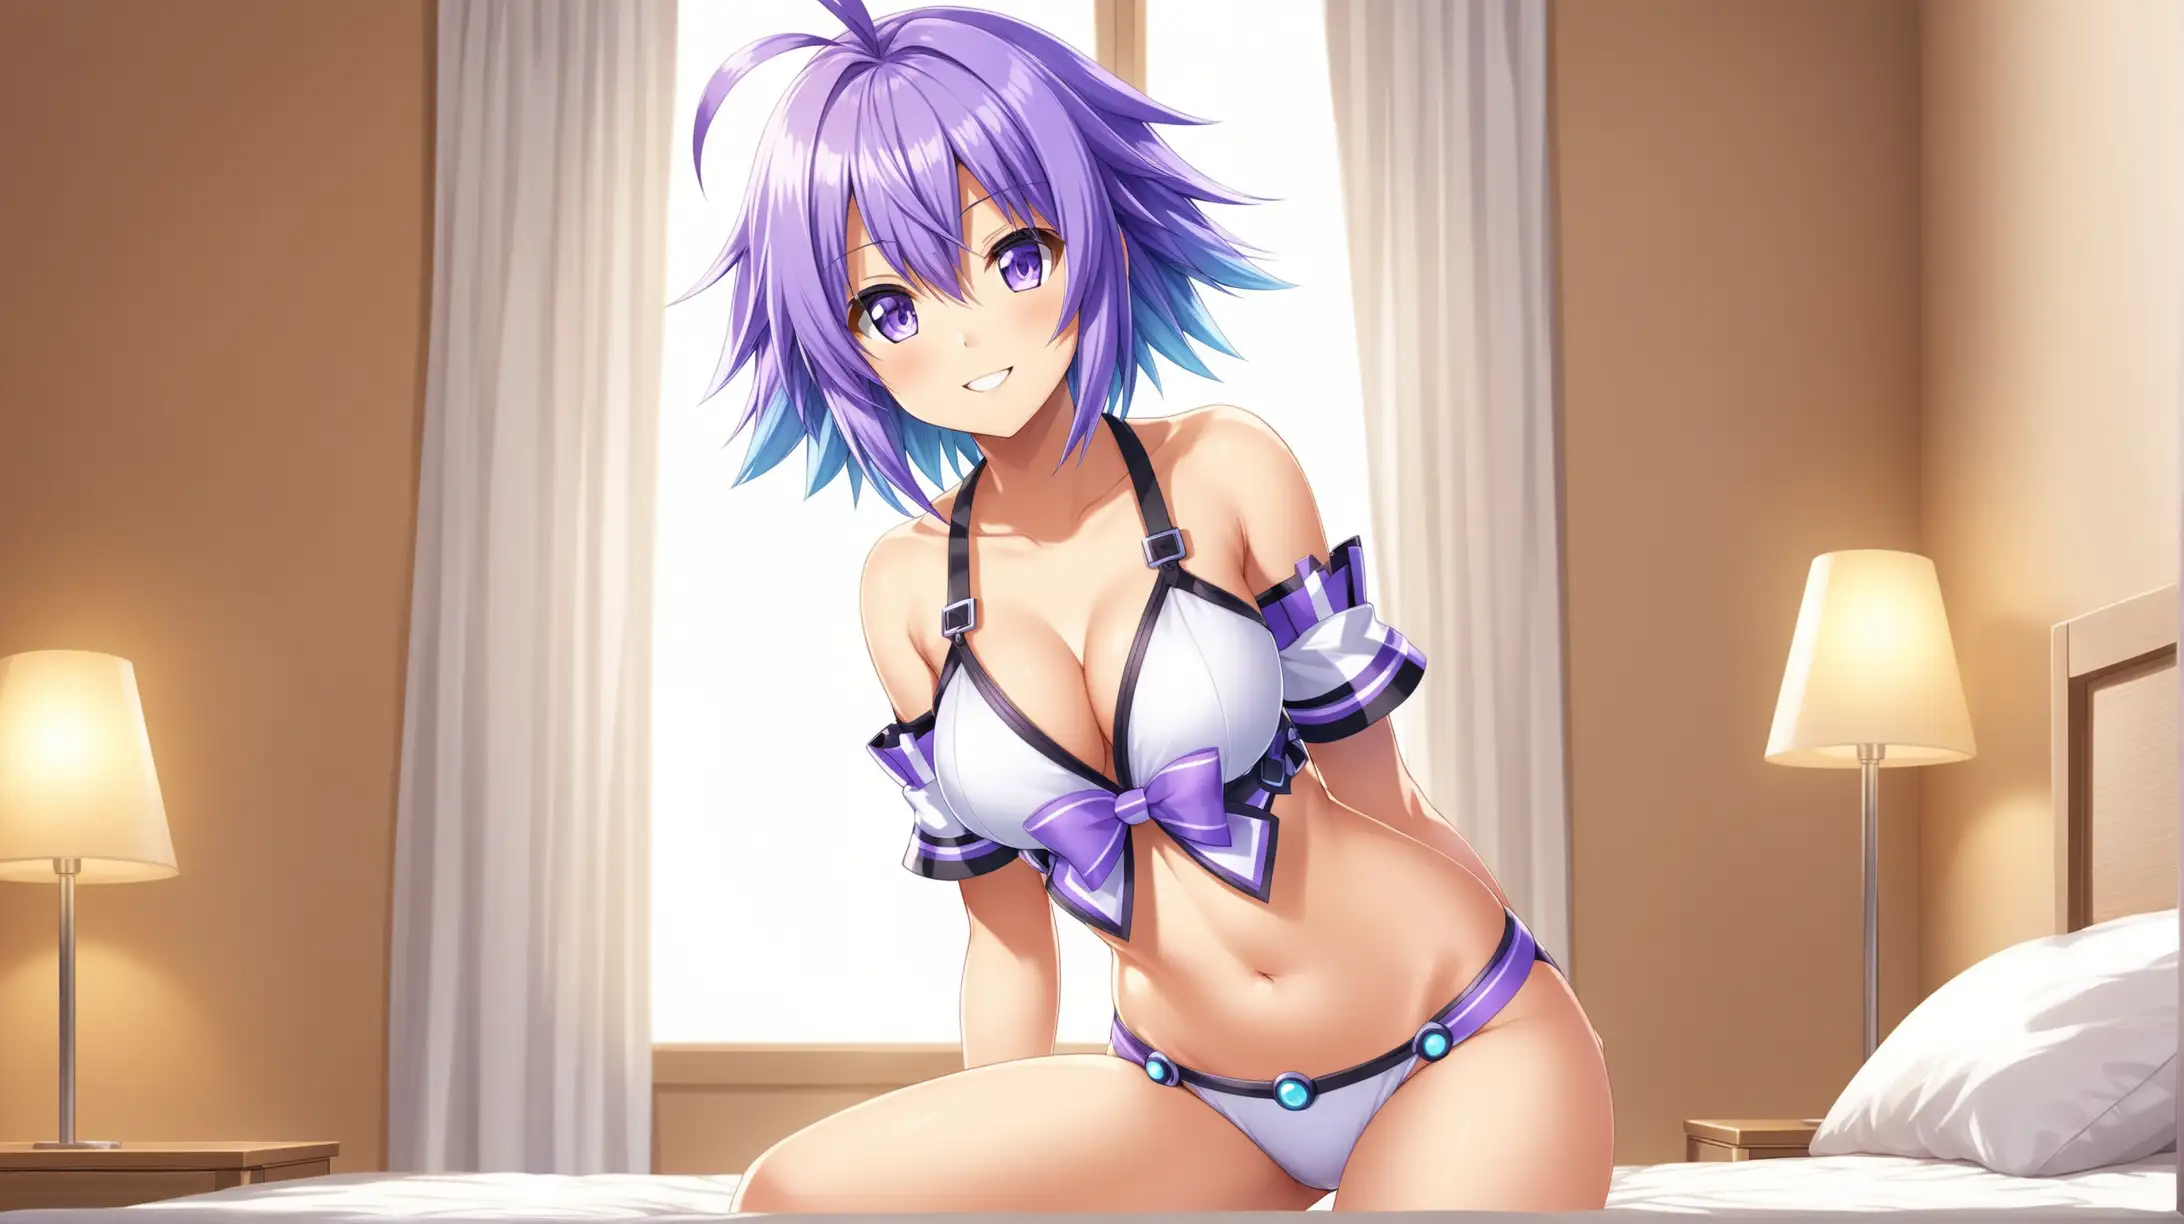 Draw the character Neptune from Hyperdimension Neptunia, short hair, high quality, natural lighting, long shot, indoors, bedroom, seductive pose, comfortable outfit, revealing, smiling at the viewer